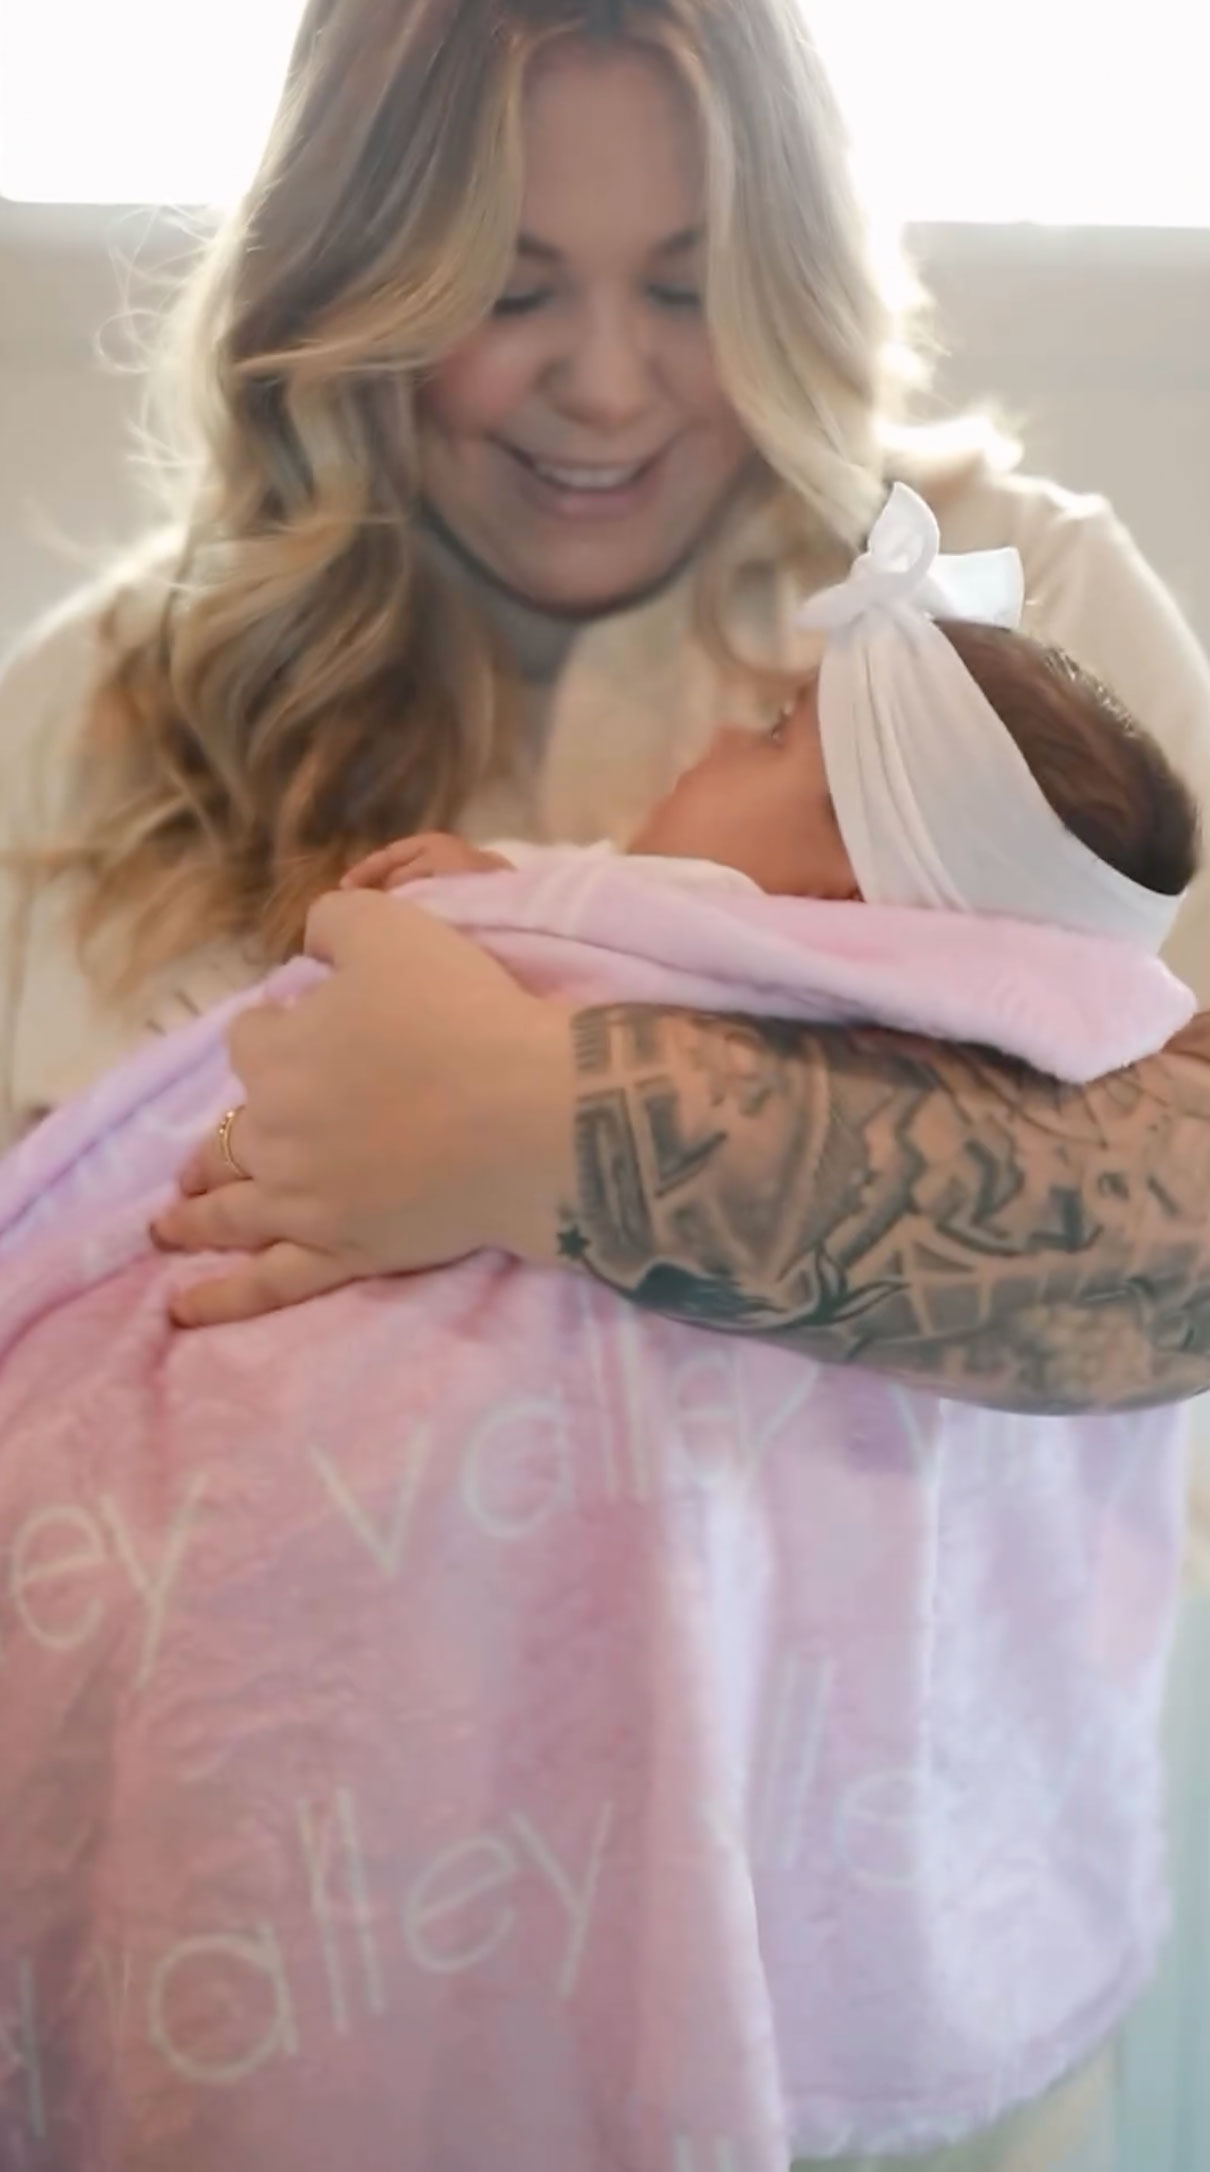 The reality star welcomed her first little girl last year